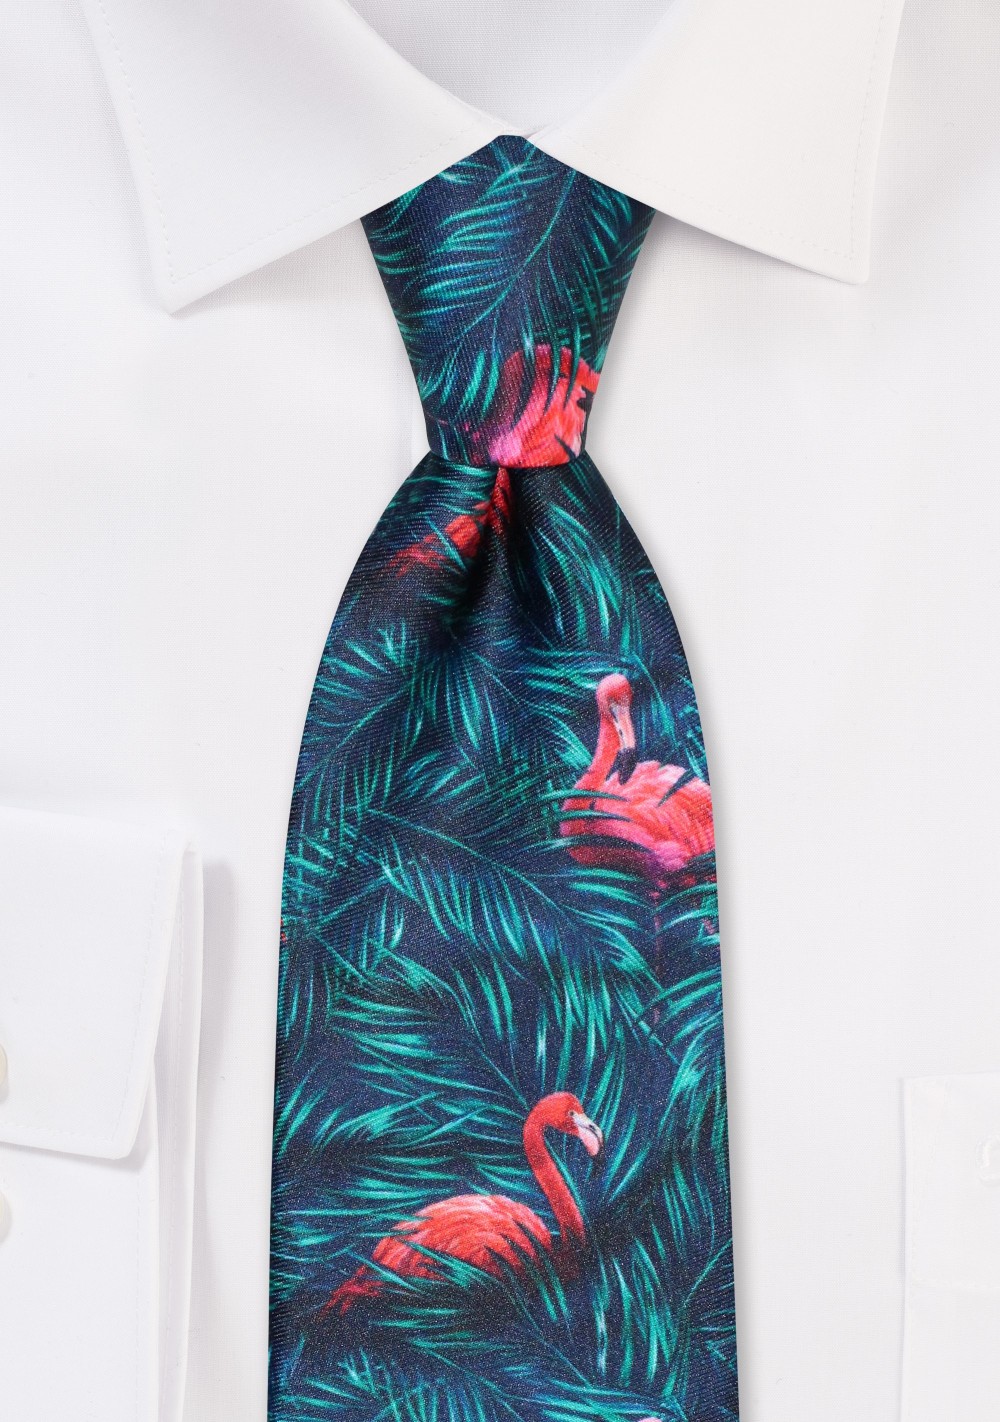 Flamingo Print Tie in Green and Pink